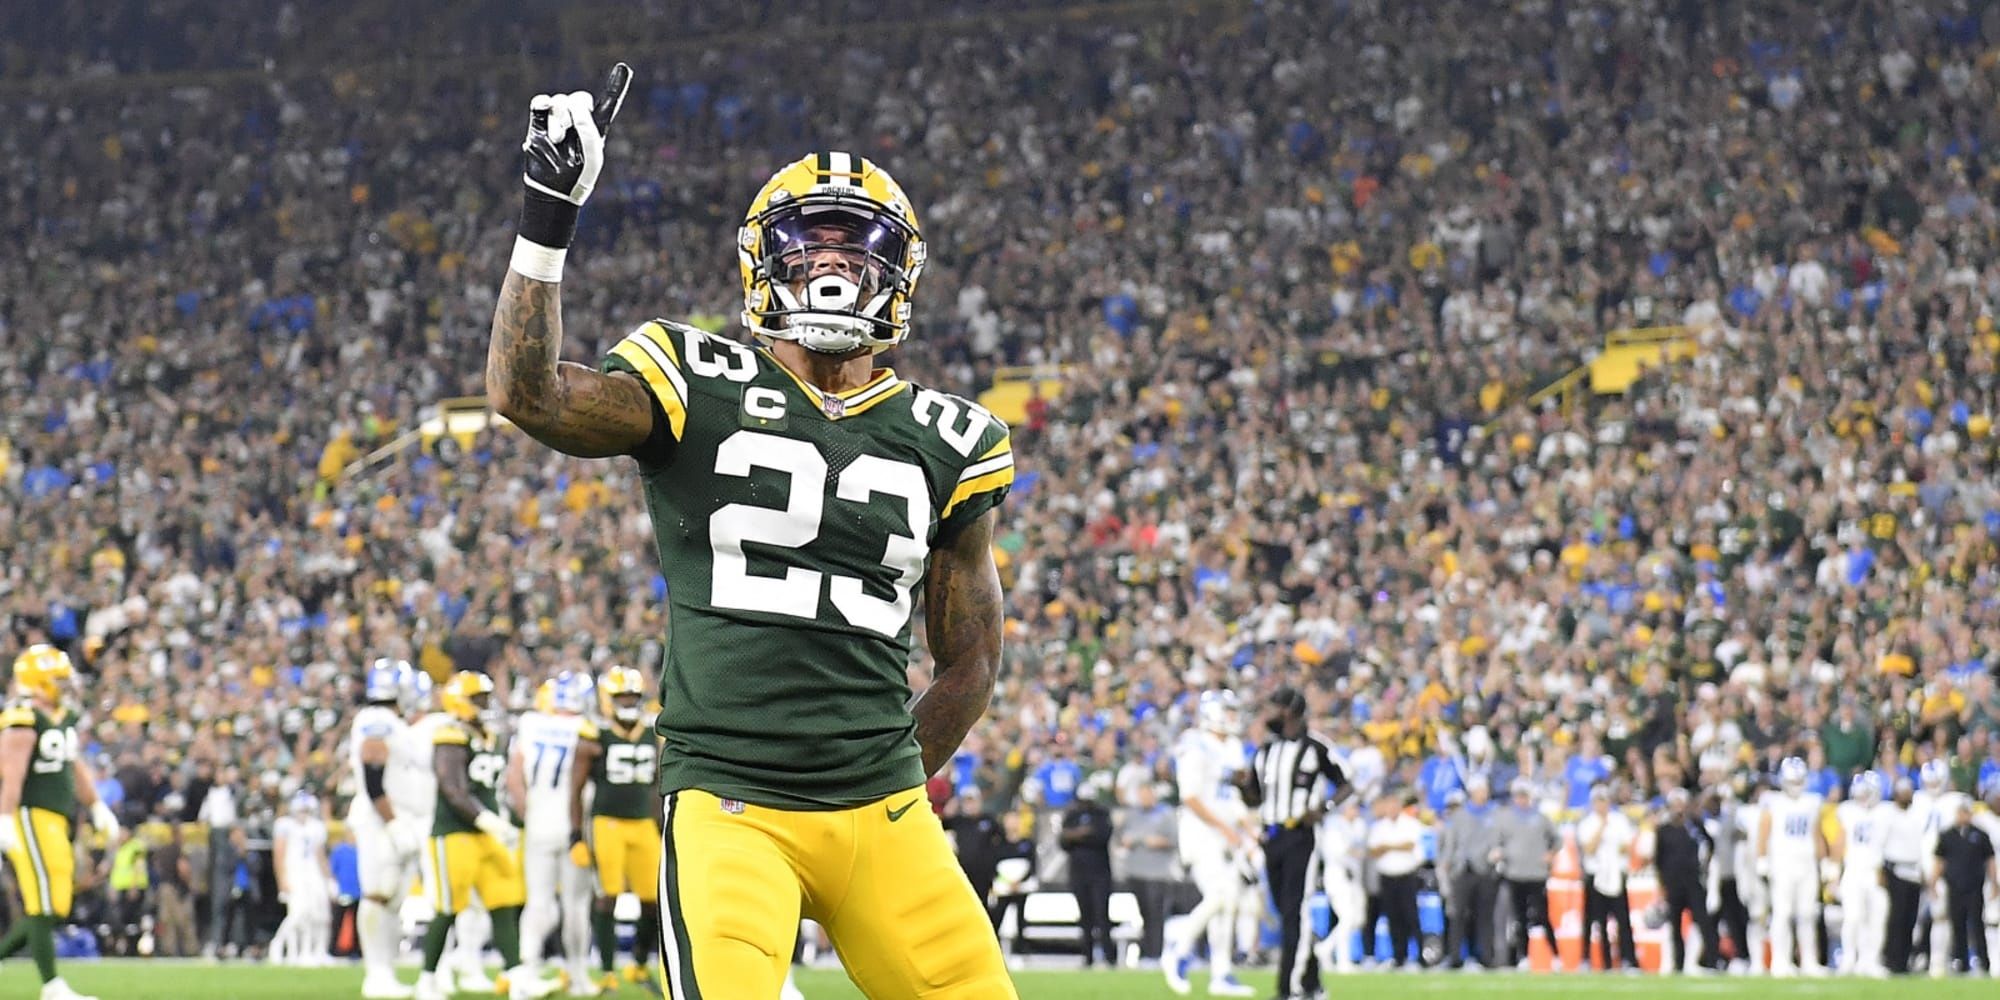 Jaire Alexander holding up a number 1 facing the crowd in a green and yellow Packers uniform